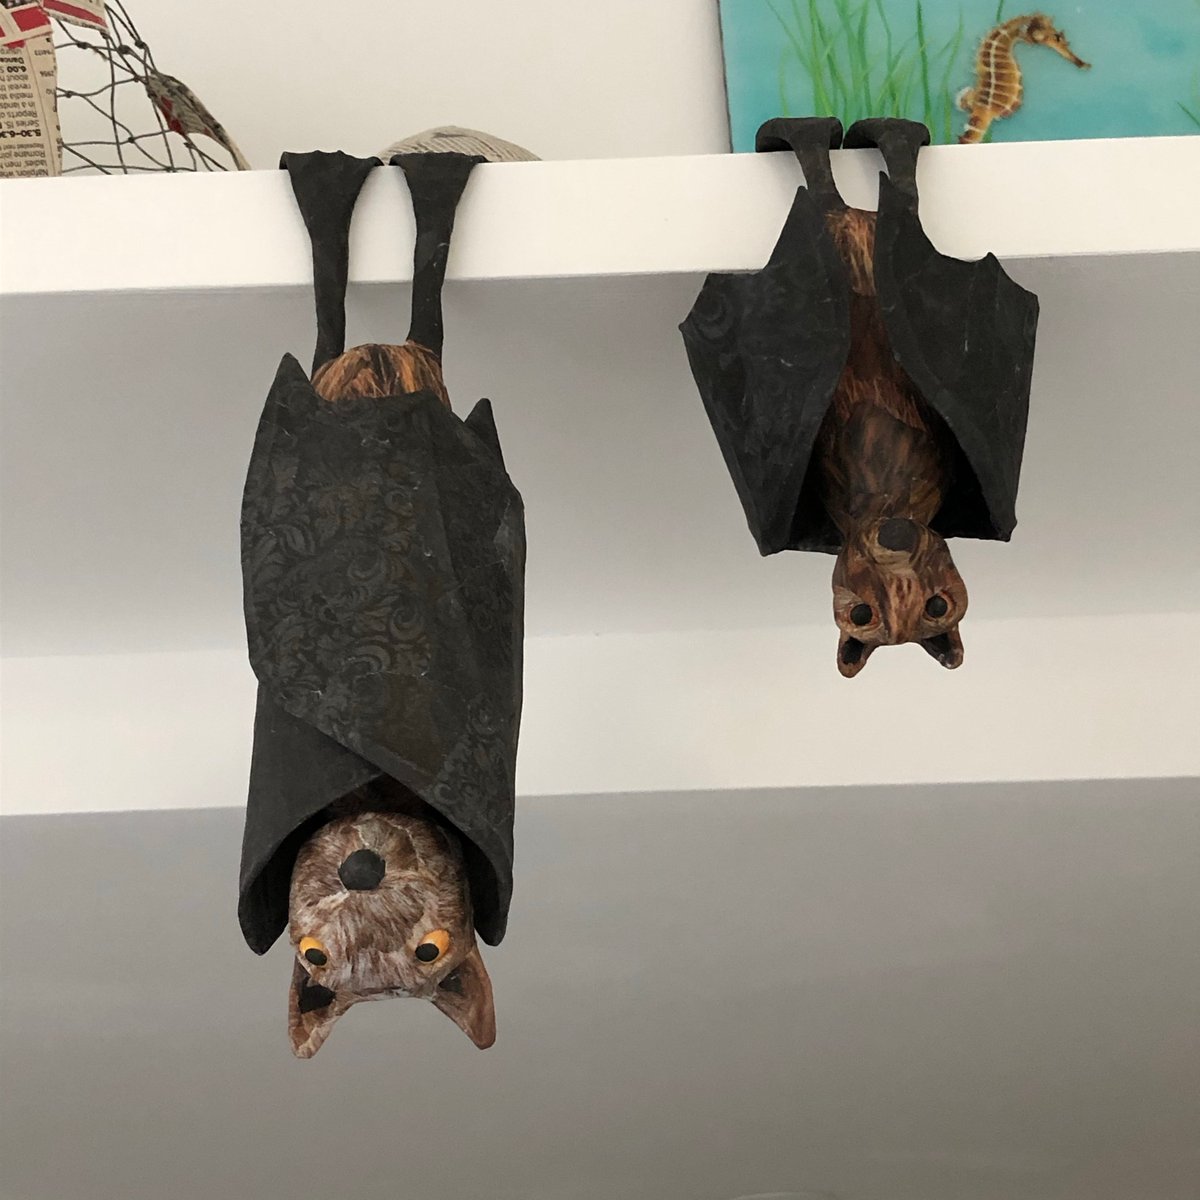 Image of A pair of Fruit Bats